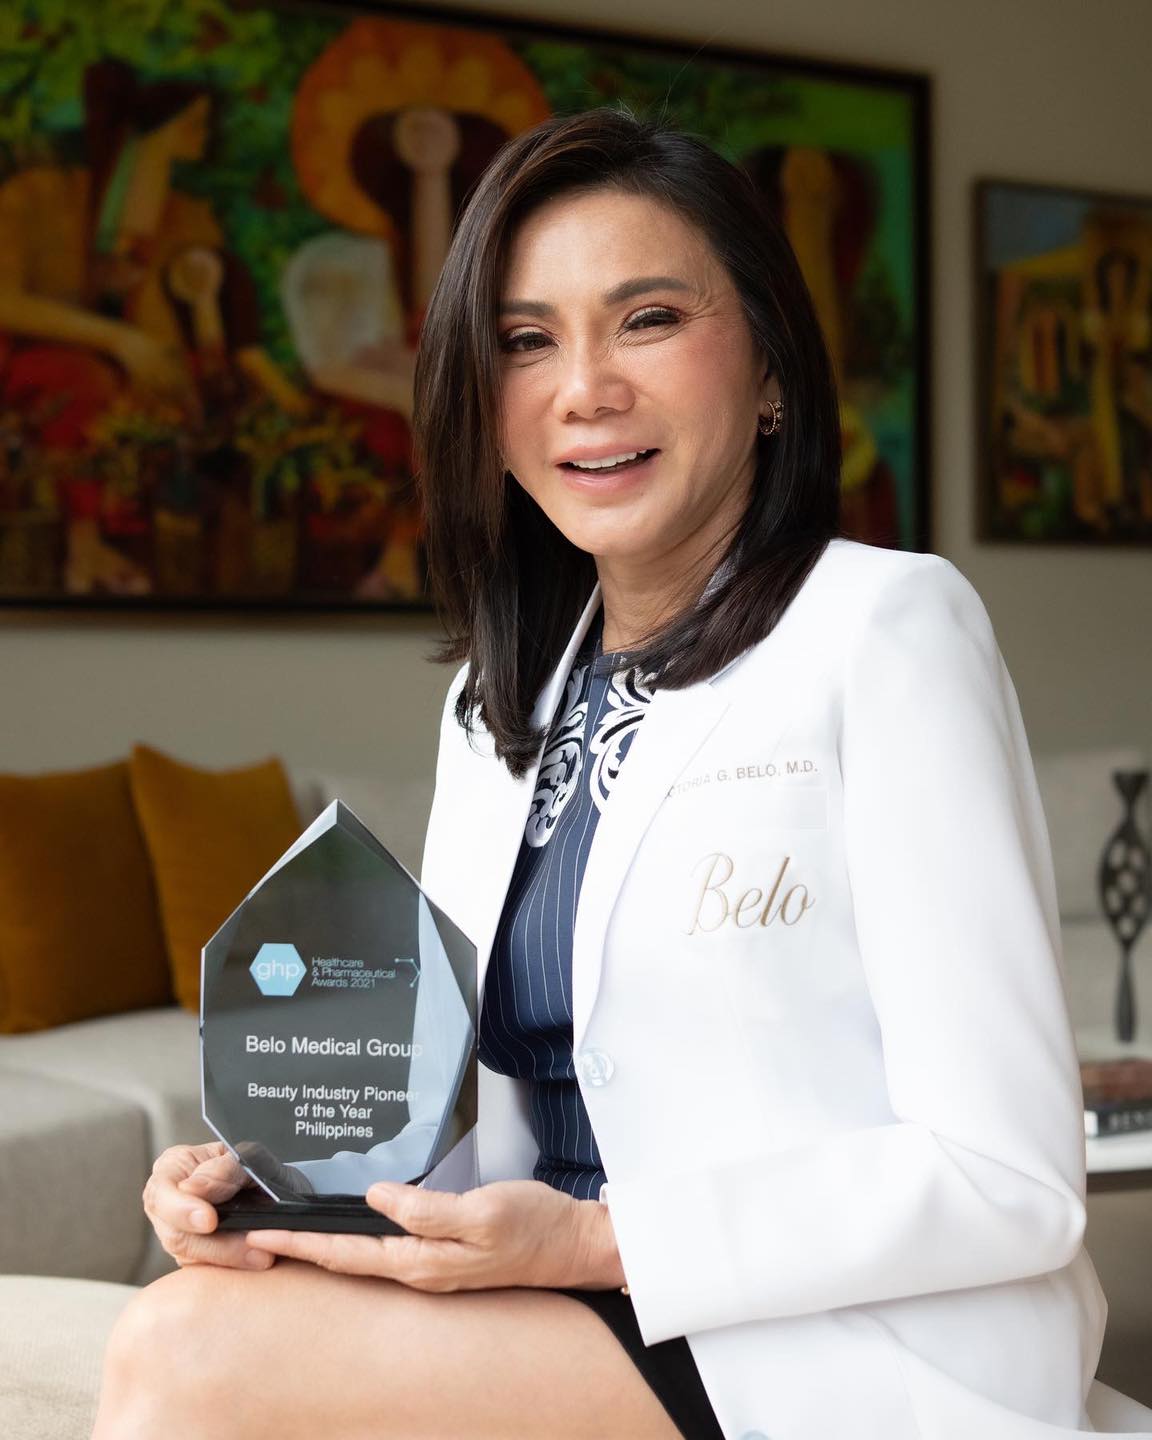 Dr. Vicki Belo with the Beauty Industry Pioneer of the Year Award from the UK-based Global Healthcare and Pharmaceutical Awards 2021